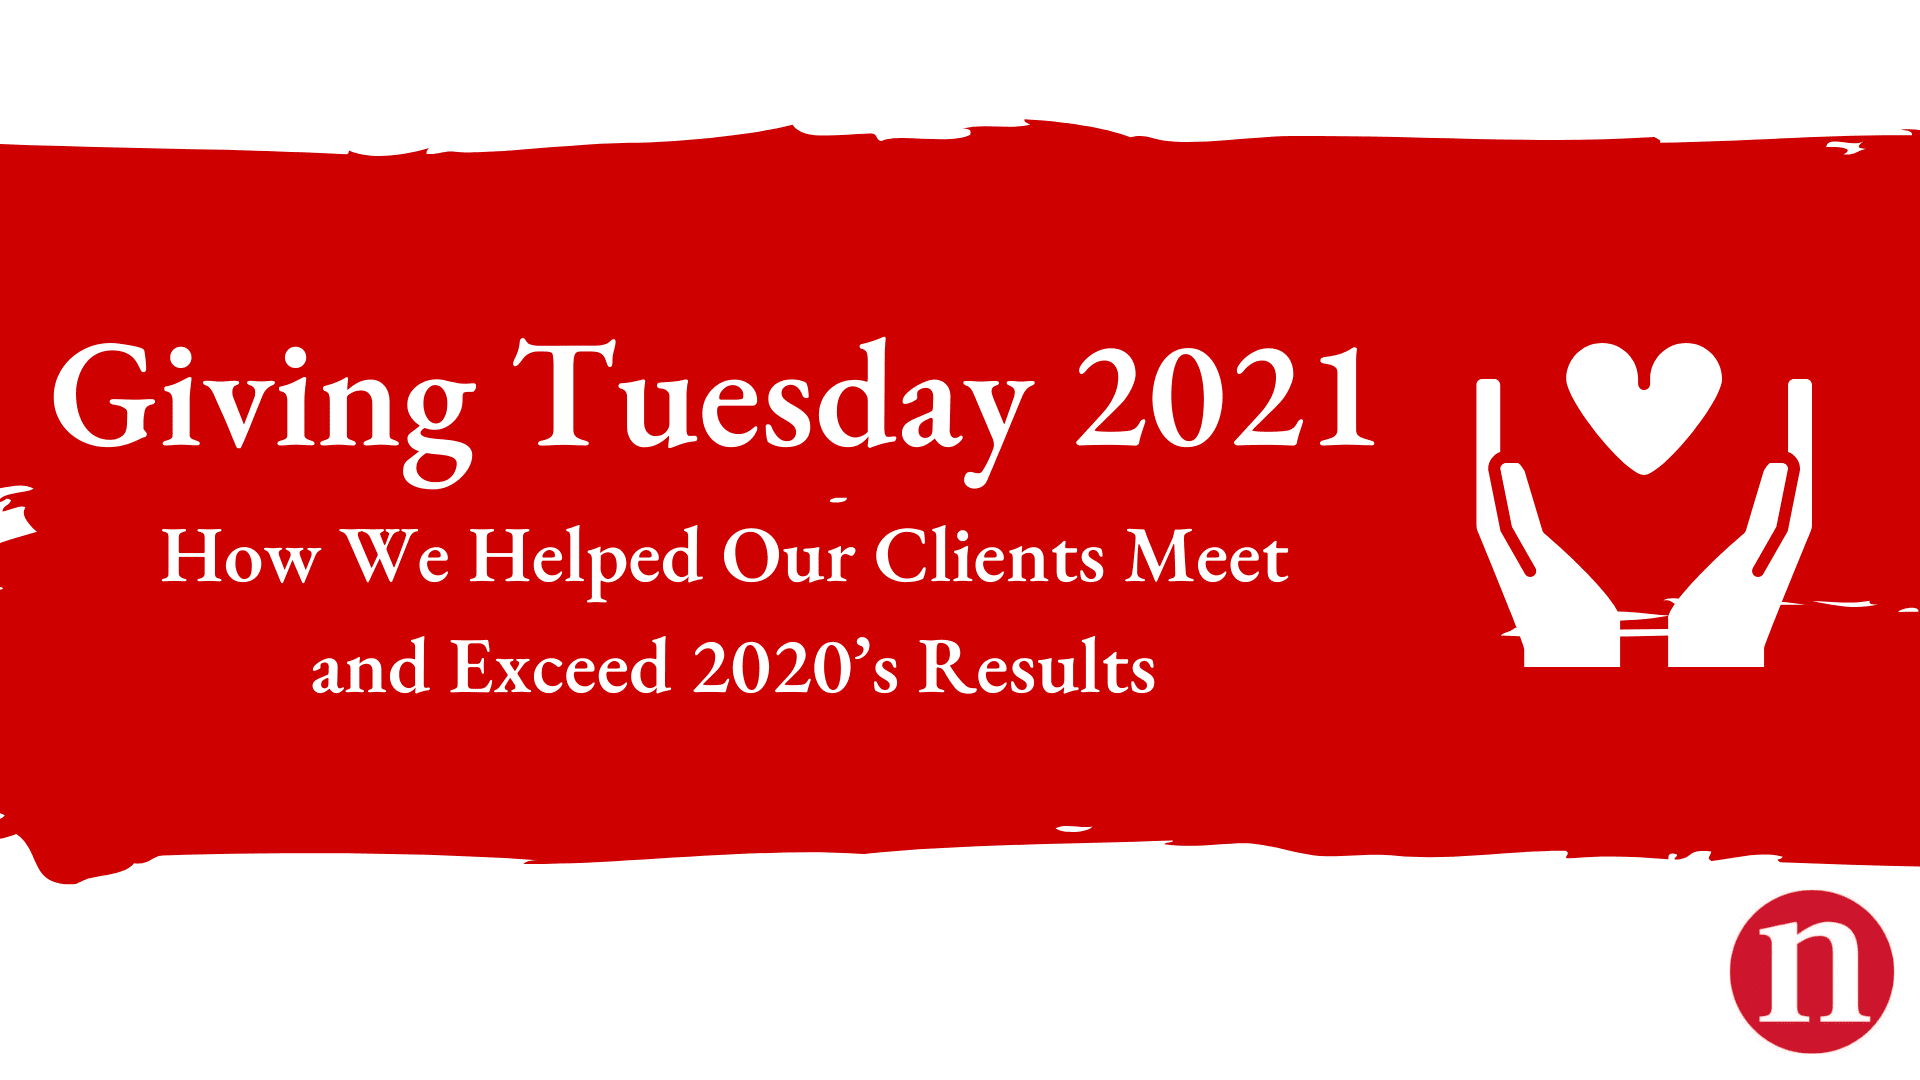 Giving Tuesday 2021 How We Helped Our Clients Meet and Exceed 2020's Results